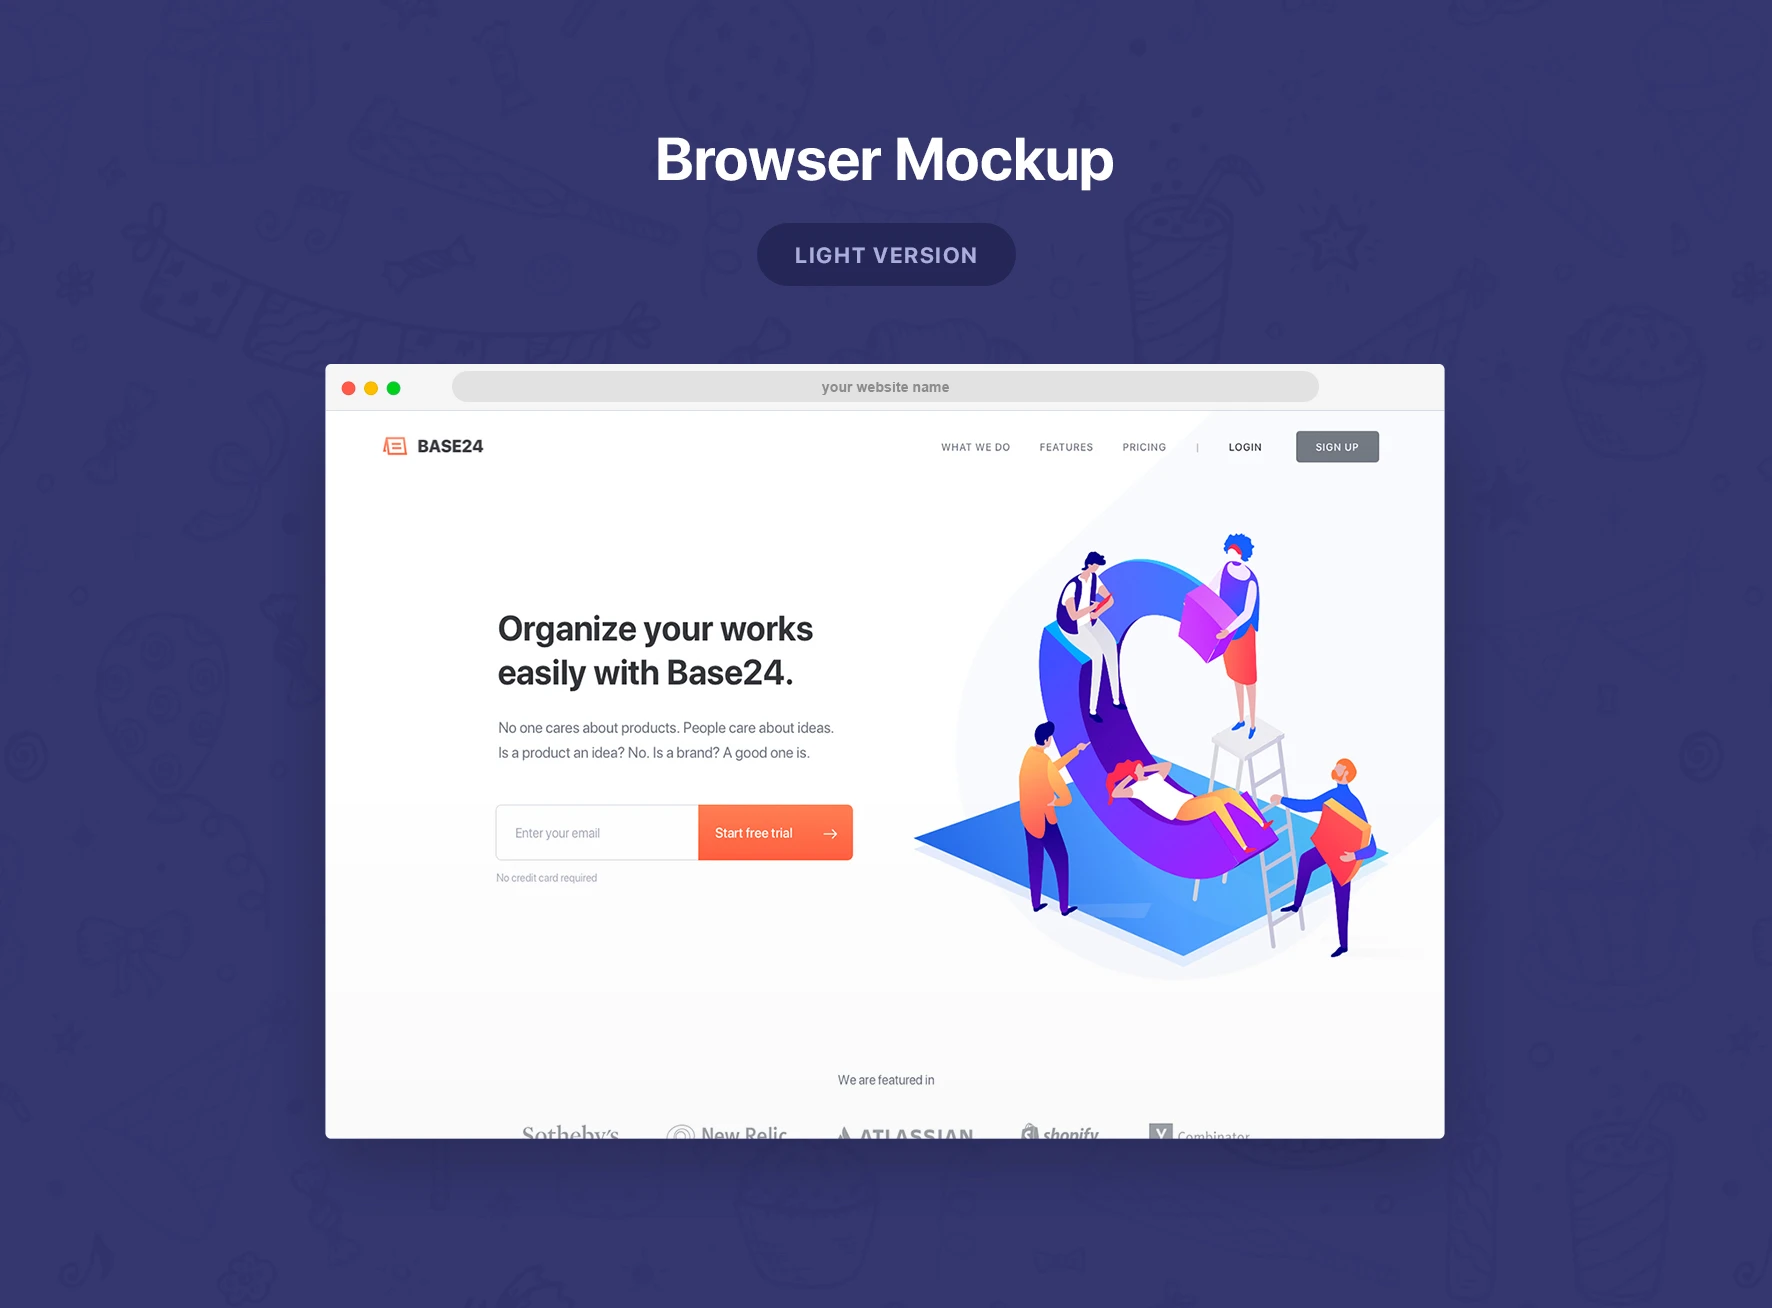 Safari Browser Mockup - Present your website in beautiful browsers. PSD and Sketch files included.